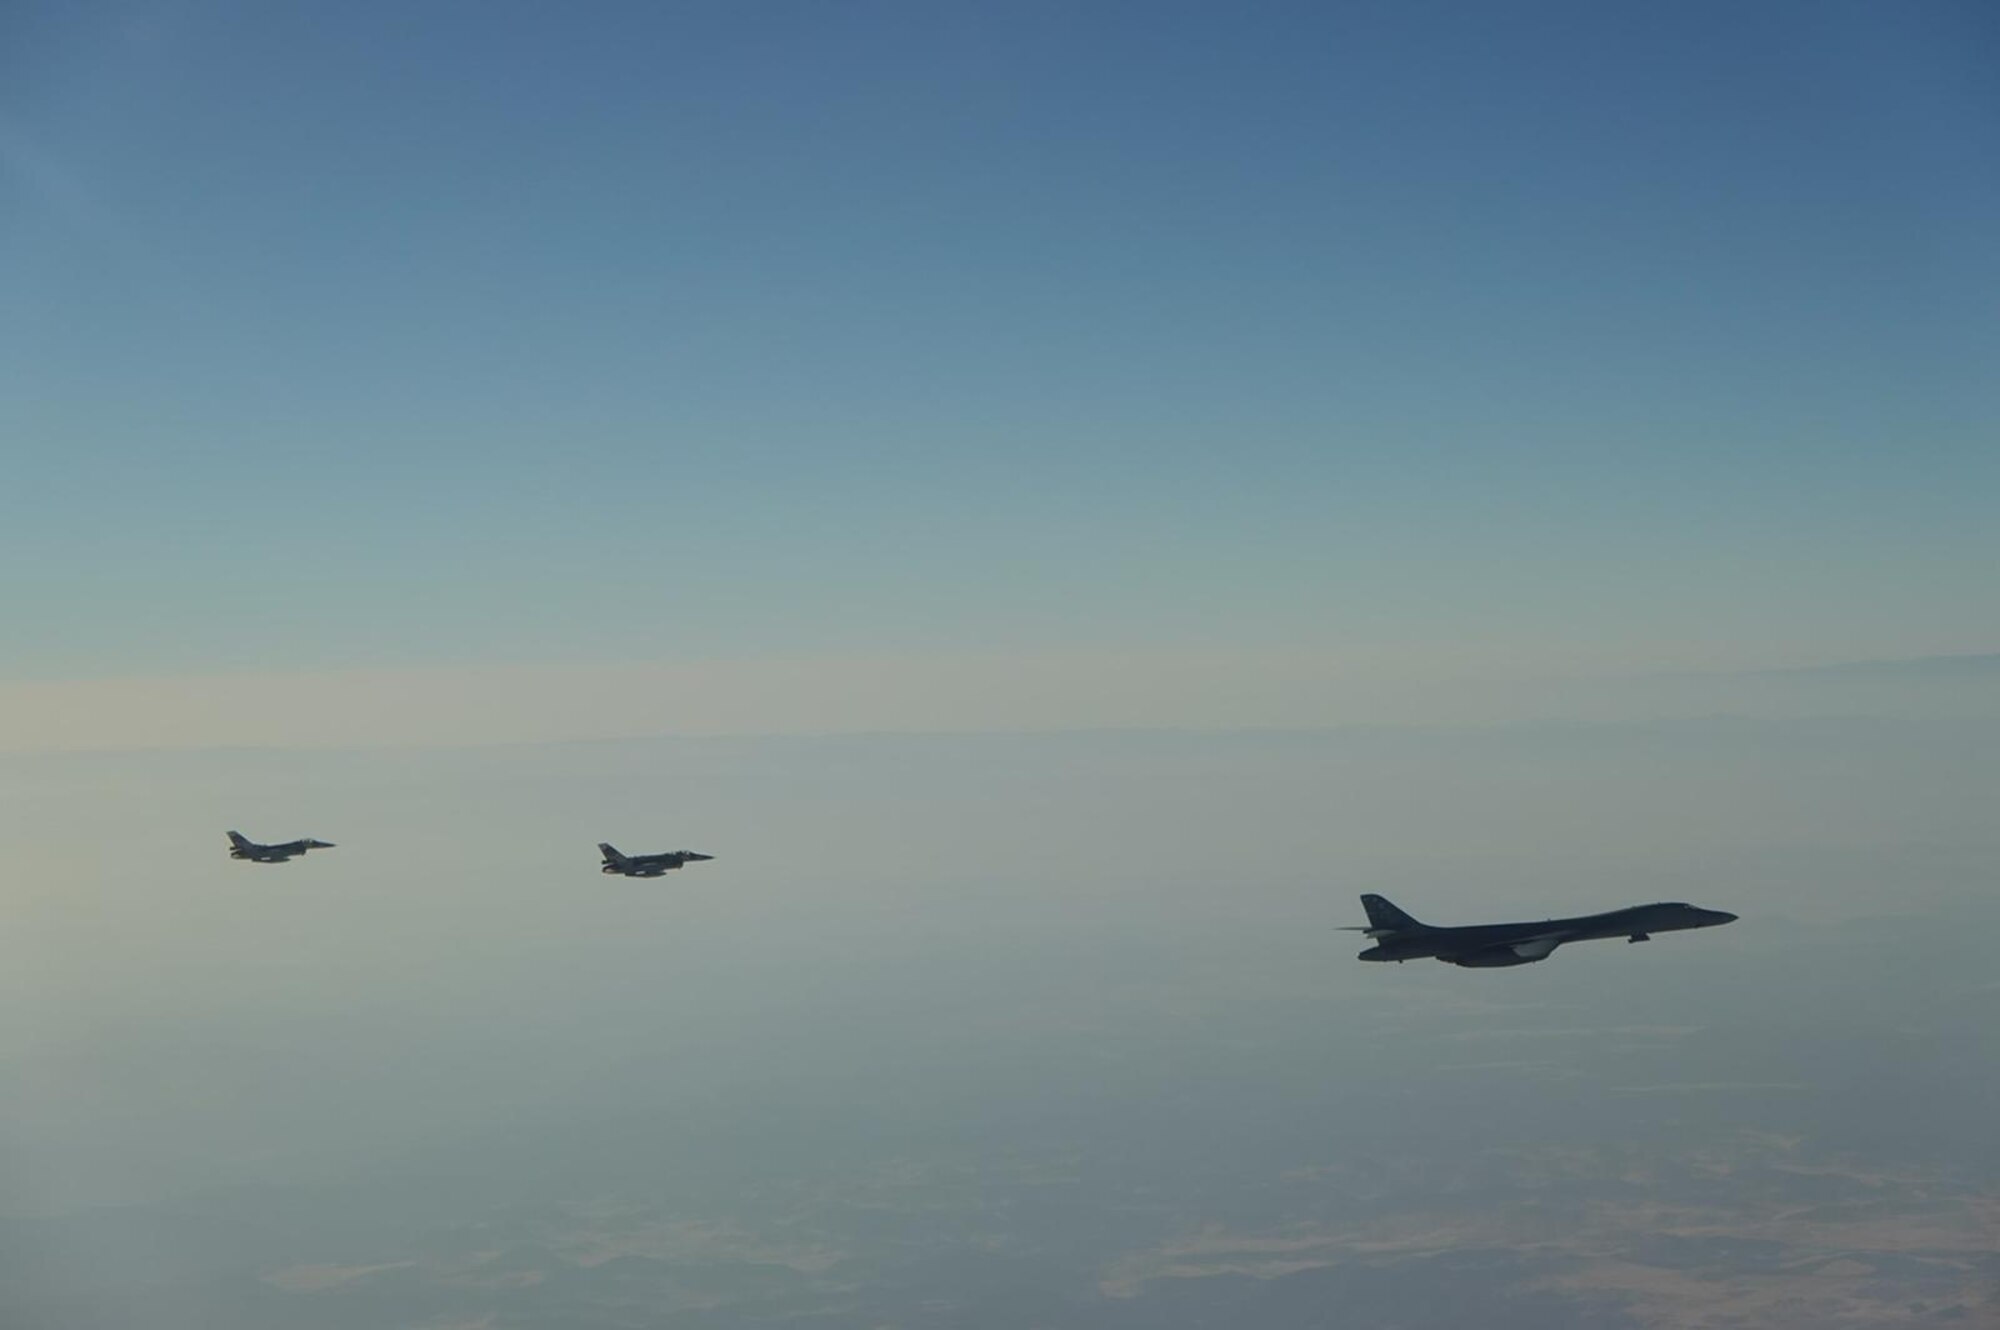 B-1B Lancer bombers from Dyess Air Force Base, Texas, fly with Royal Moroccan Air Force F-16 and F-5 aircraft off the coast of Morocco, June 30, 2022, in support of African Lion 2022. African Lion 2022 (AL22) is U.S. Africa Command's largest, premier, joint, annual exercise hosted by Morocco, Ghana, Senegal and Tunisia, June 6 - 30. More than 7,500 participants from 28 nations and NATO train together with a focus on enhancing readiness for U.S. and partner nation forces. AL22 is a joint all-domain, multi component, and multinational exercise, employing a full array of mission capabilities with the goal to strengthen interoperability among participants and set the theater for strategic access.

(U.S. Air Force Courtesy Photo)